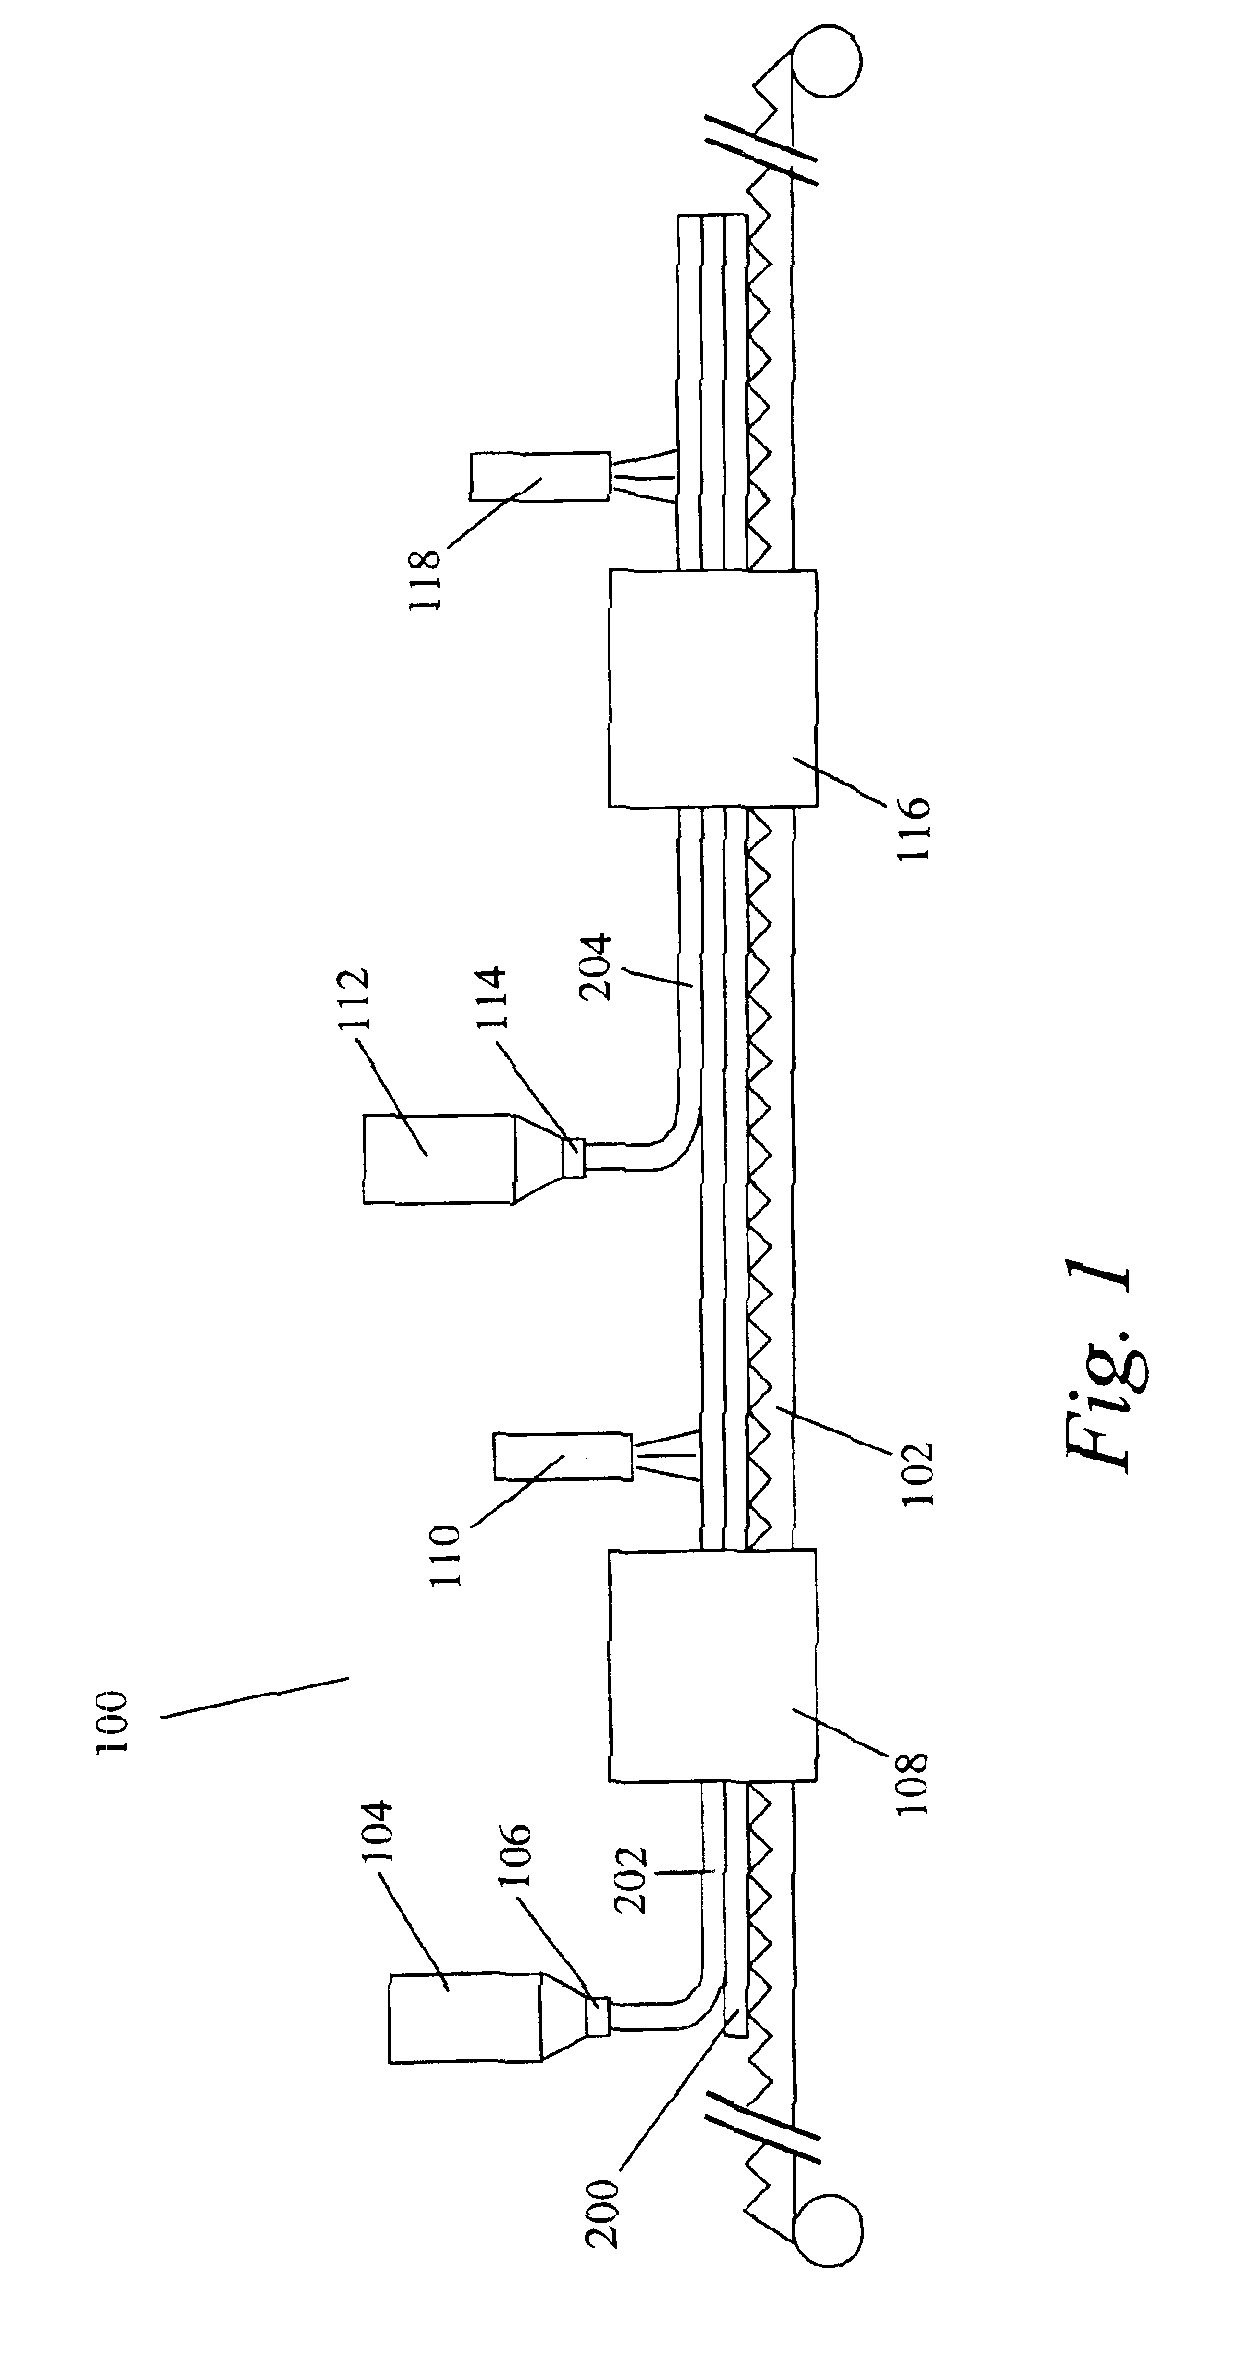 Optical bodies containing cholesteric liquid crystal material and methods of manufacture